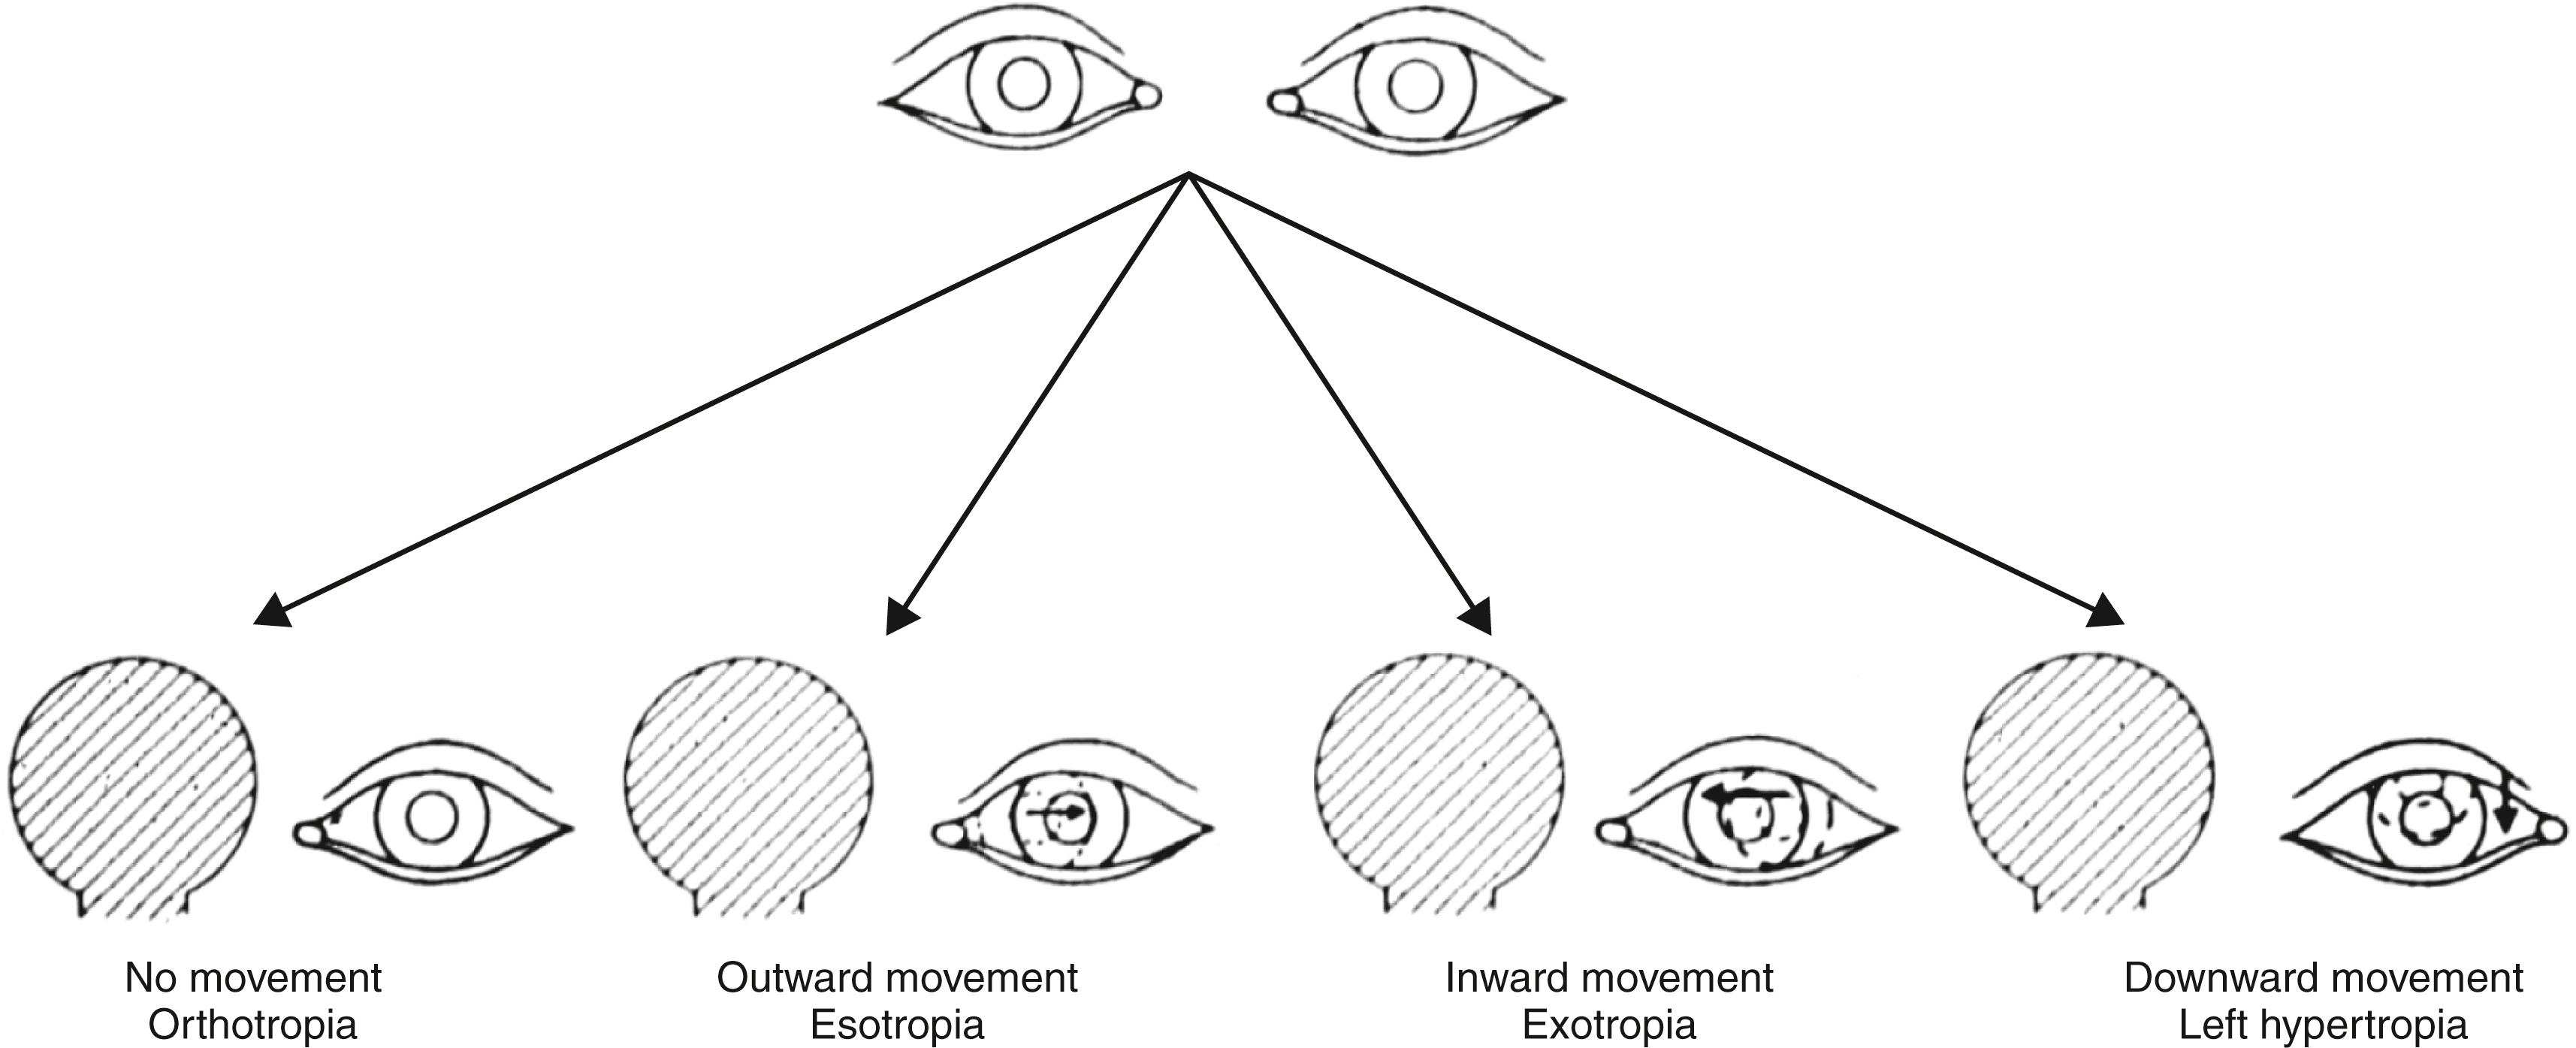 Fig. 43.6, The cover test. In each instance, the occluder is placed over the right eye while the patient is viewing a fixation target and the examiner is watching for movement of the patient’s left eye. If the left eye is not aligned, it will need to move to look at the fixation target. If there is no movement of the left eye, the test needs to be repeated by occluding the left eye and watching for movement of the right eye.